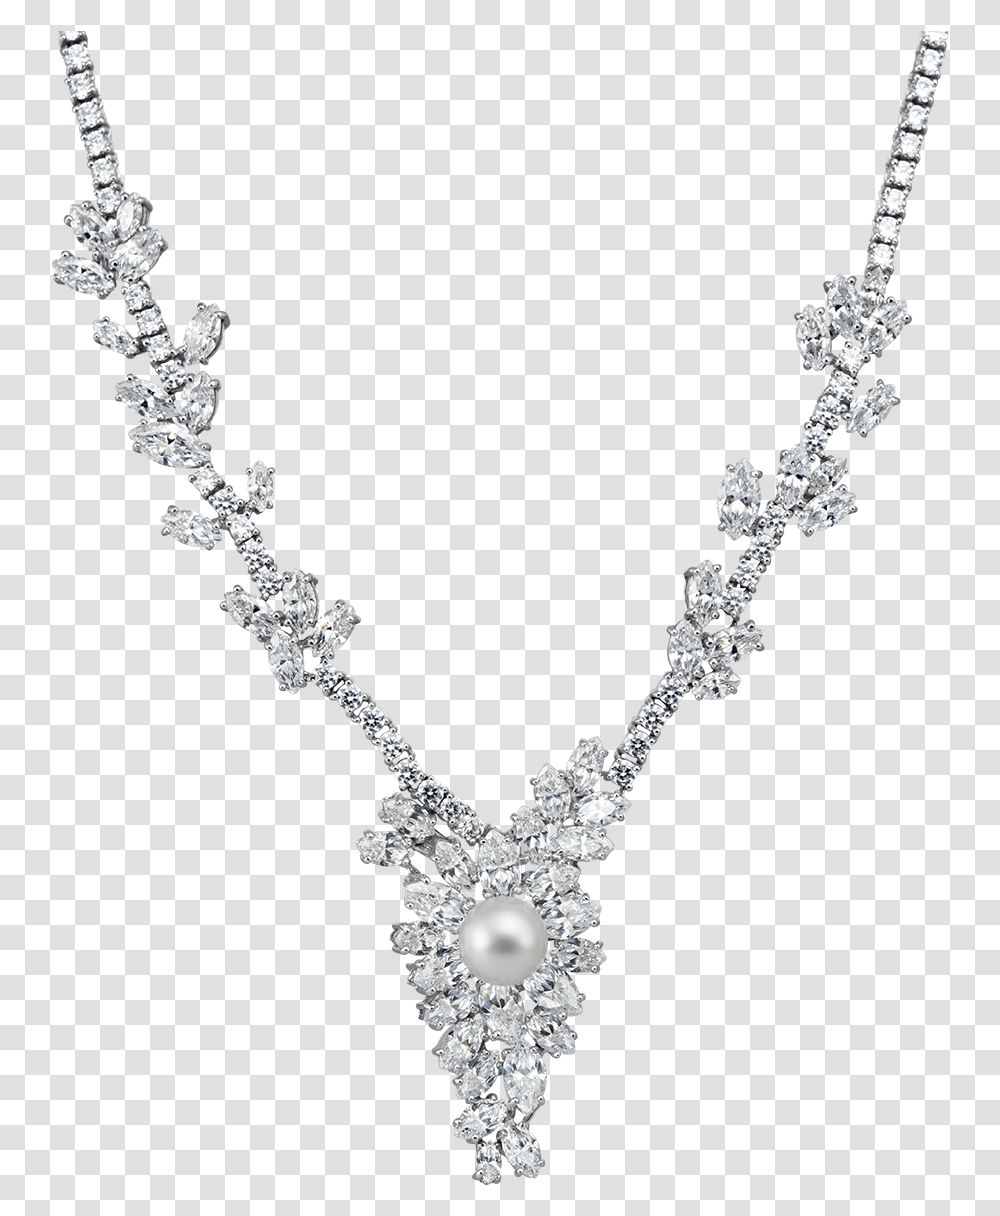 Annabelle Ciro Pearl Necklace Jewellery Silver Necklace, Jewelry, Accessories, Accessory, Diamond Transparent Png